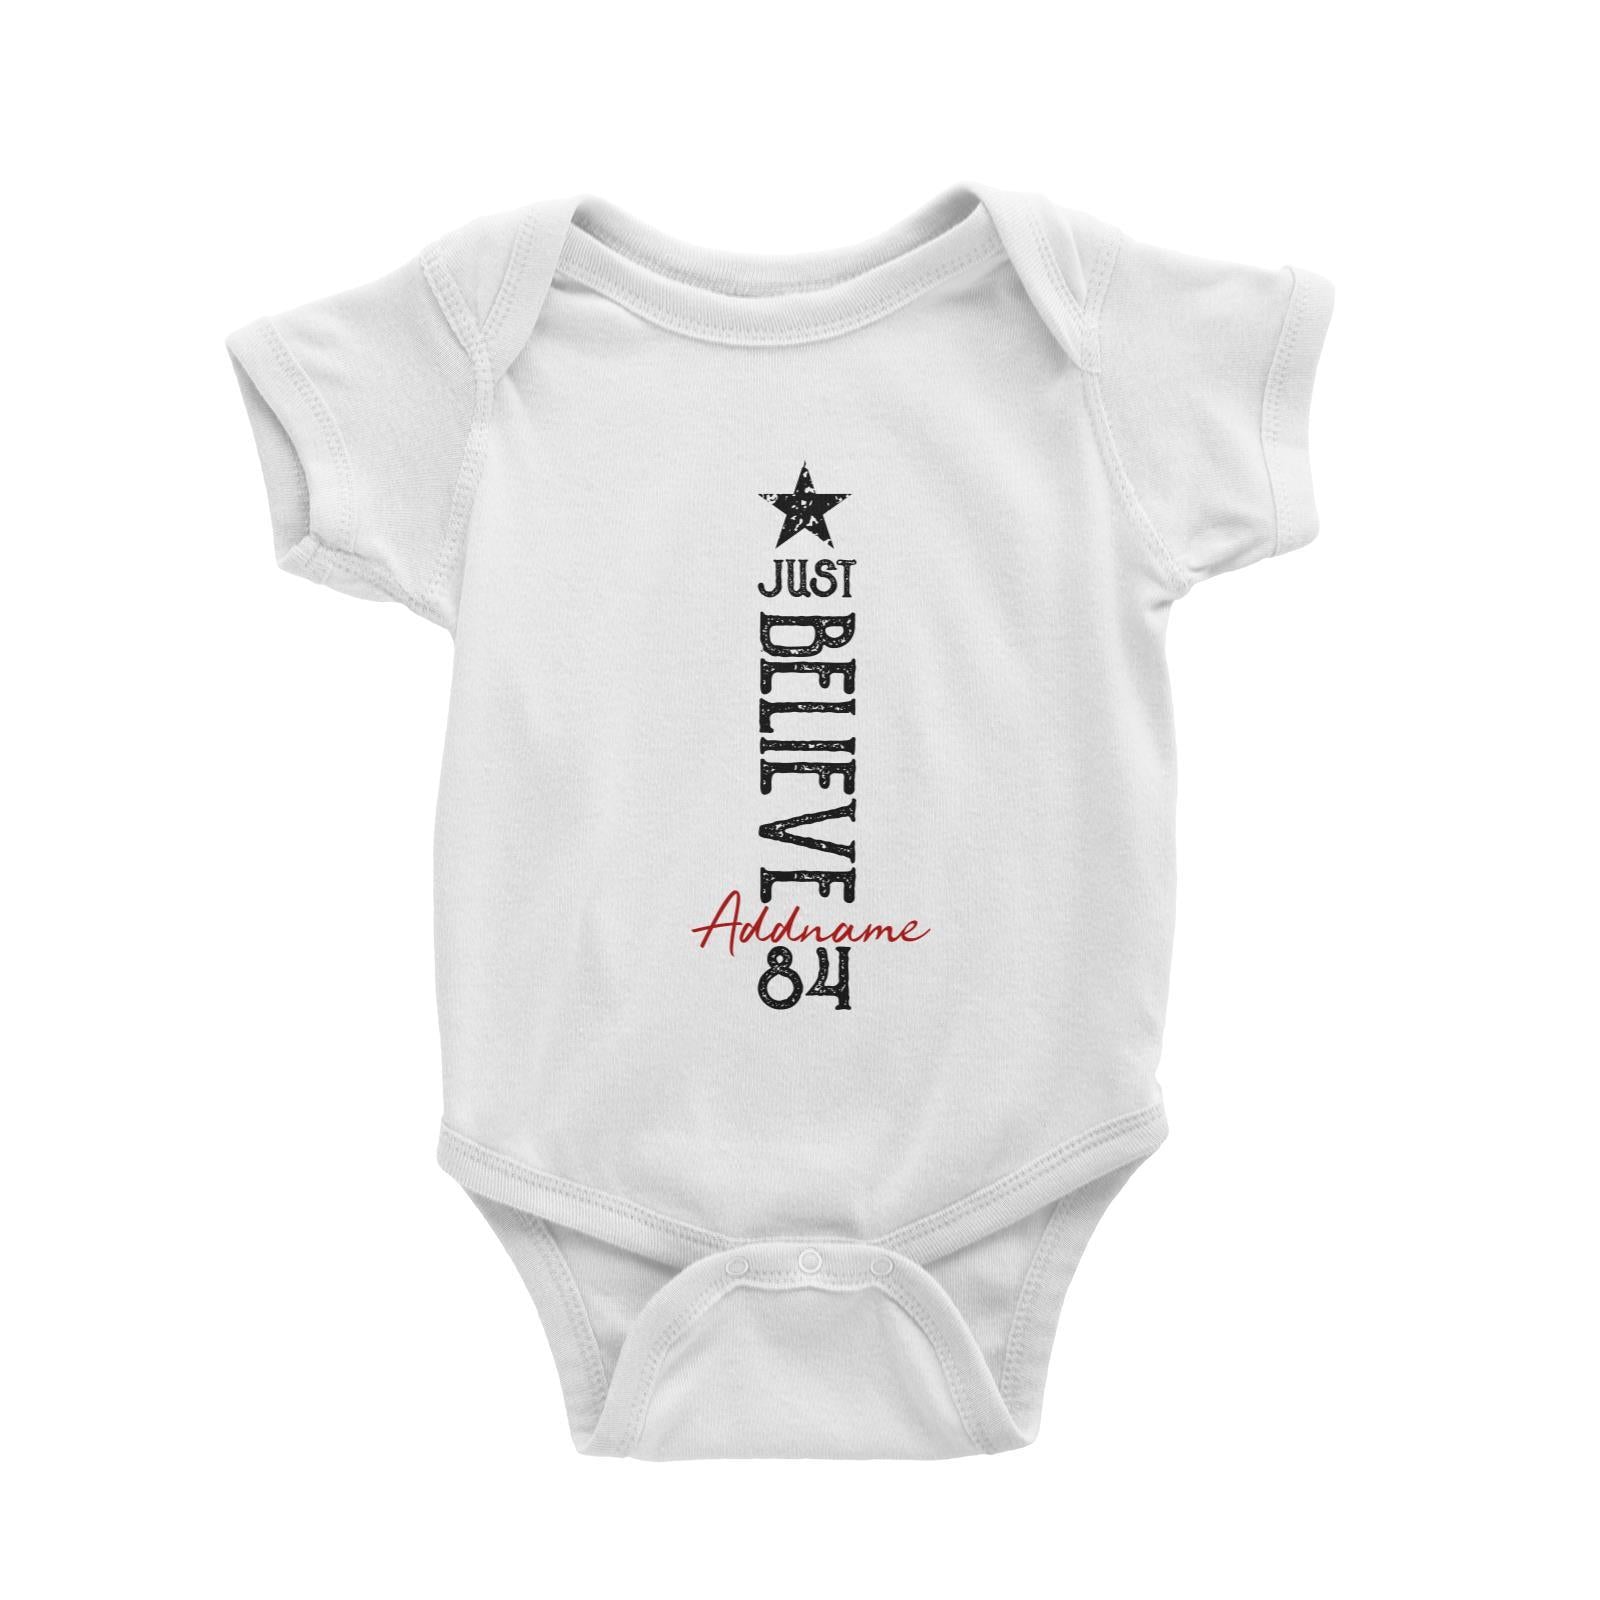 Just Believe Personalizable with Name and Number Baby Romper